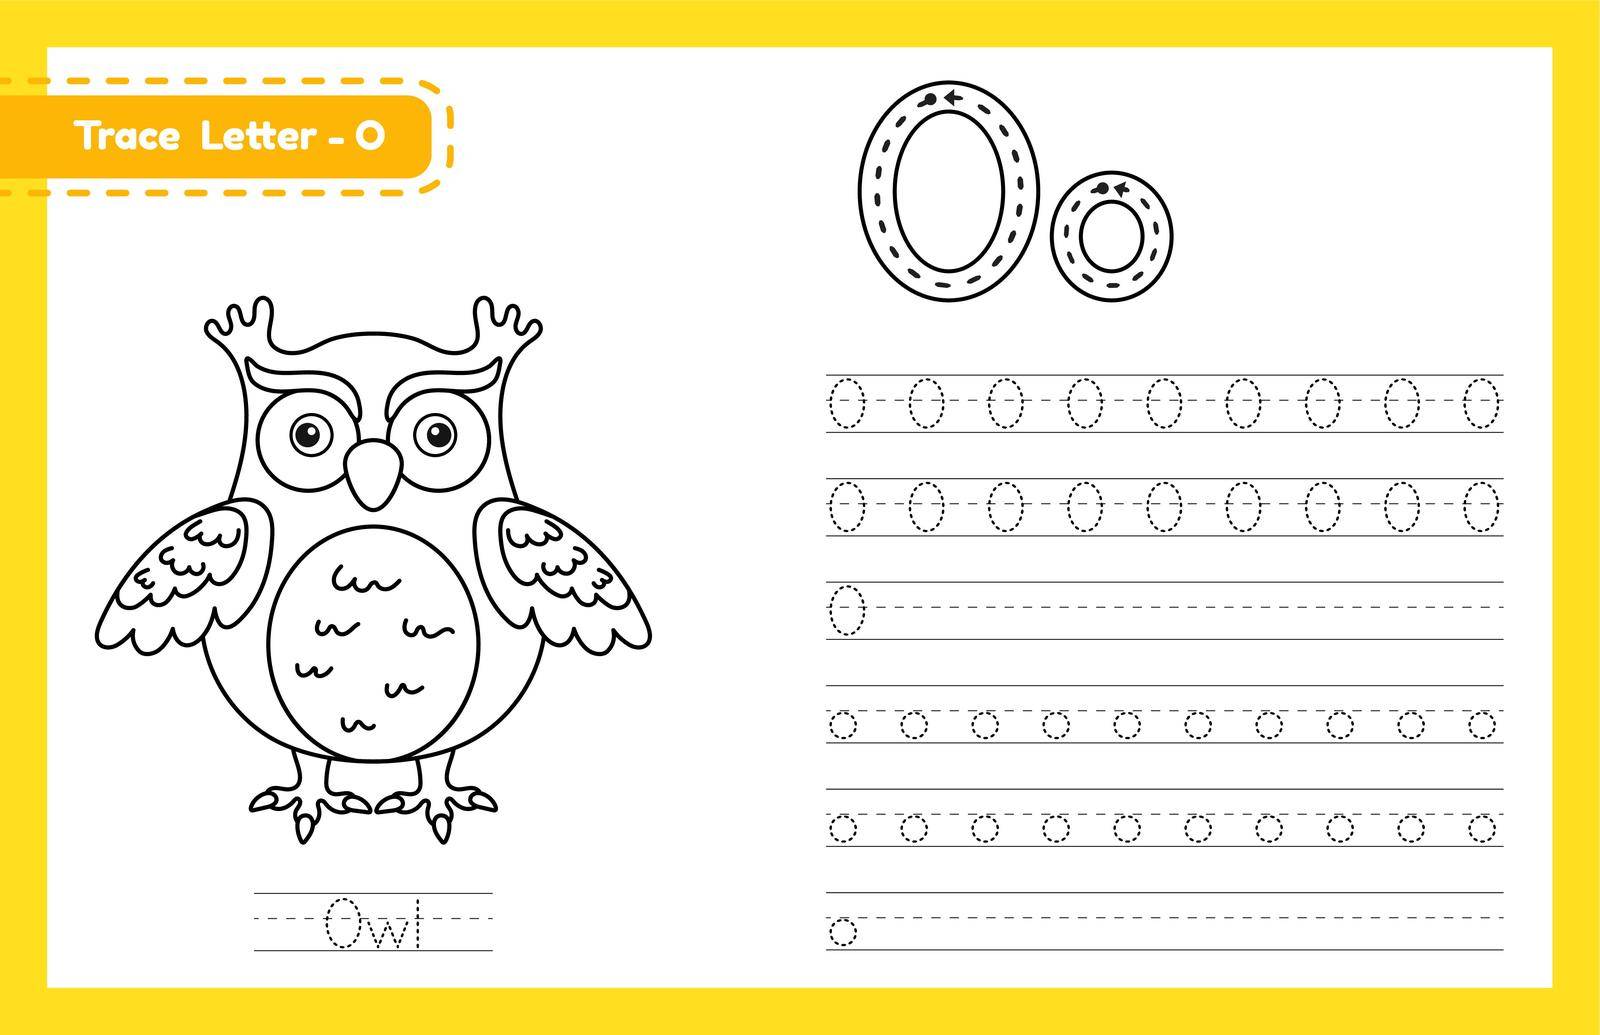 Trace letter O uppercase and lowercase. Alphabet tracing practice preschool worksheet for kids learning English with cute cartoon animal. Coloring book for Pre K, kindergarten. Vector illustration by Melnyk